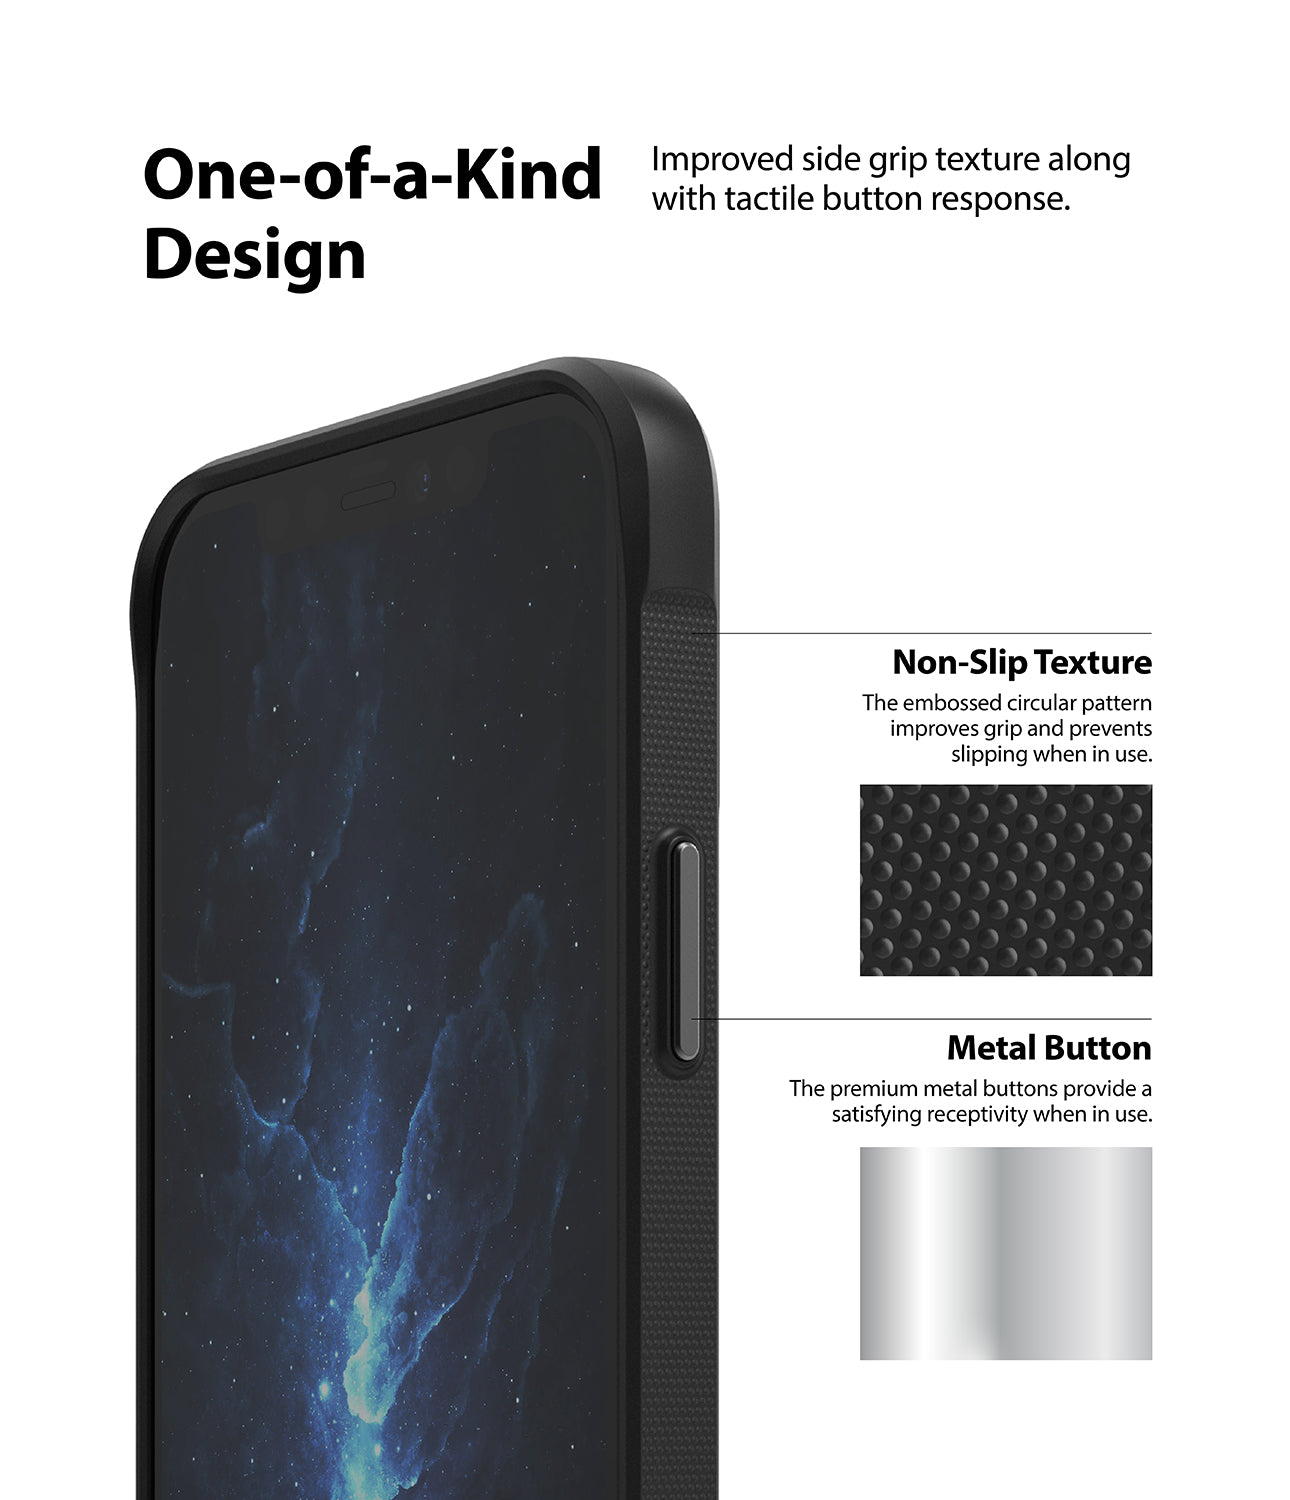 iPhone 12 Pro Max Case | Onyx Design - One-of-a-kind Design